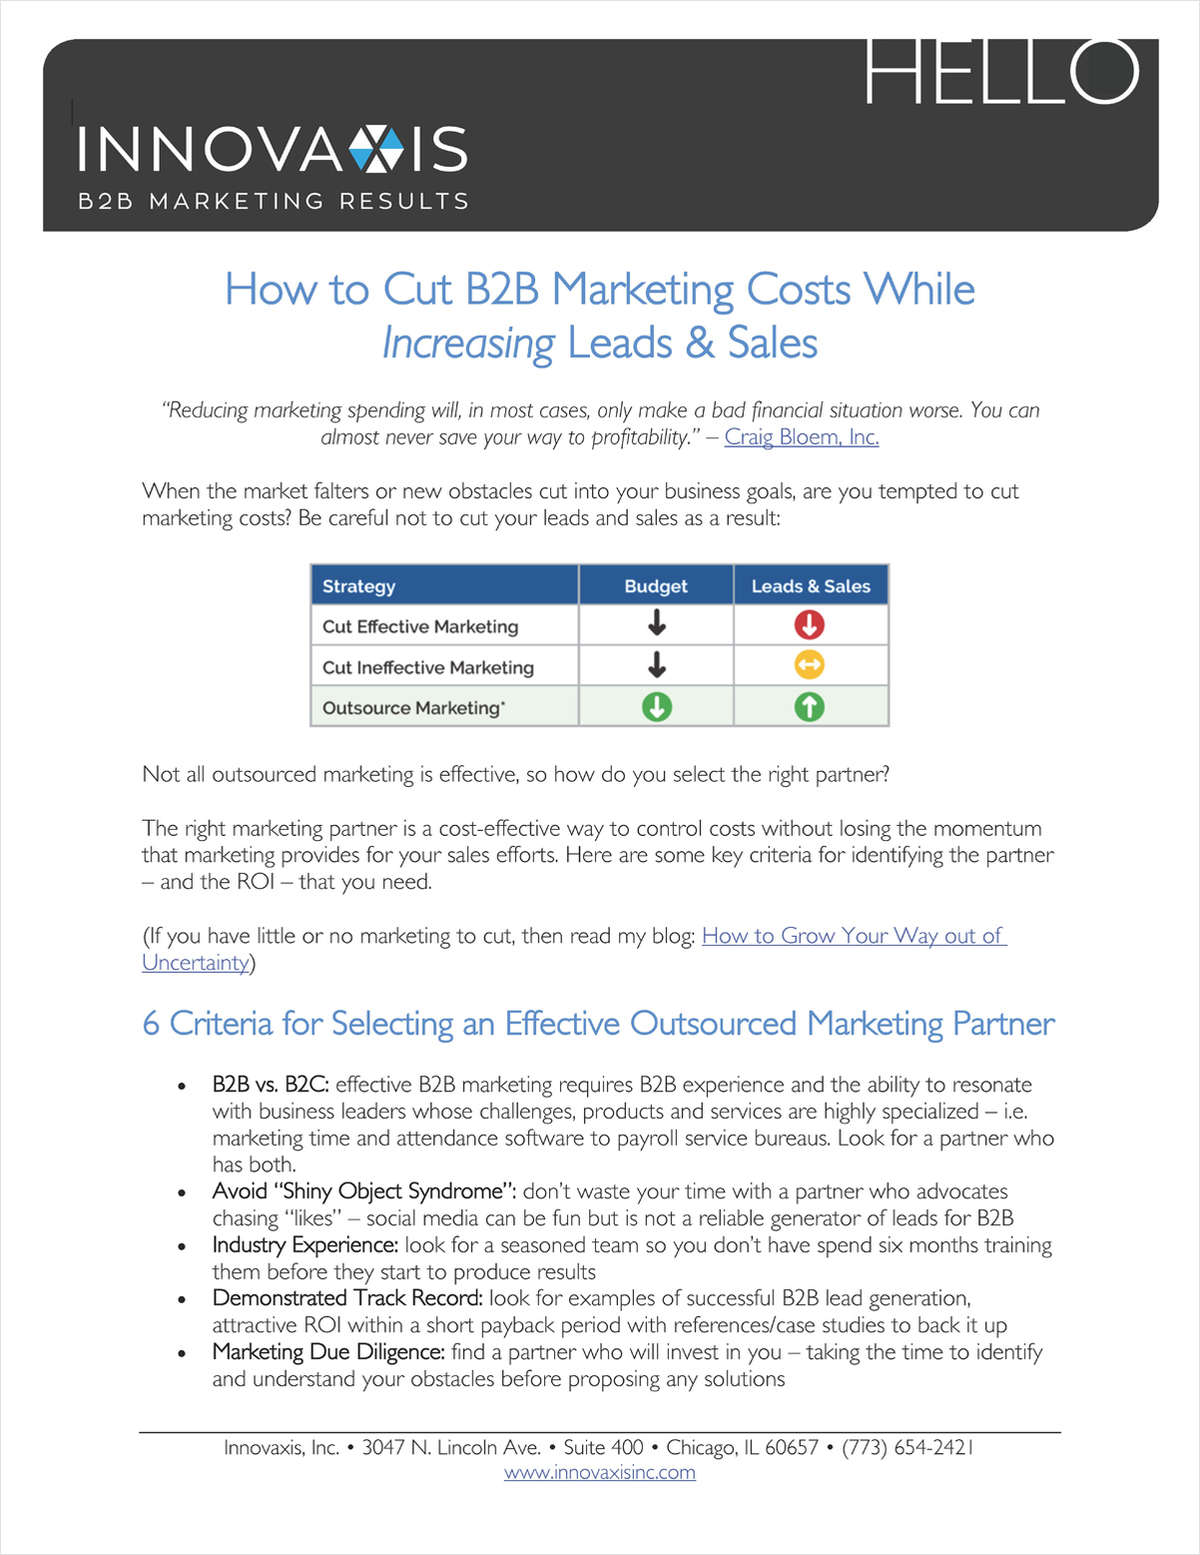 How to Cut B2B Marketing Costs and Increase Leads & Sales